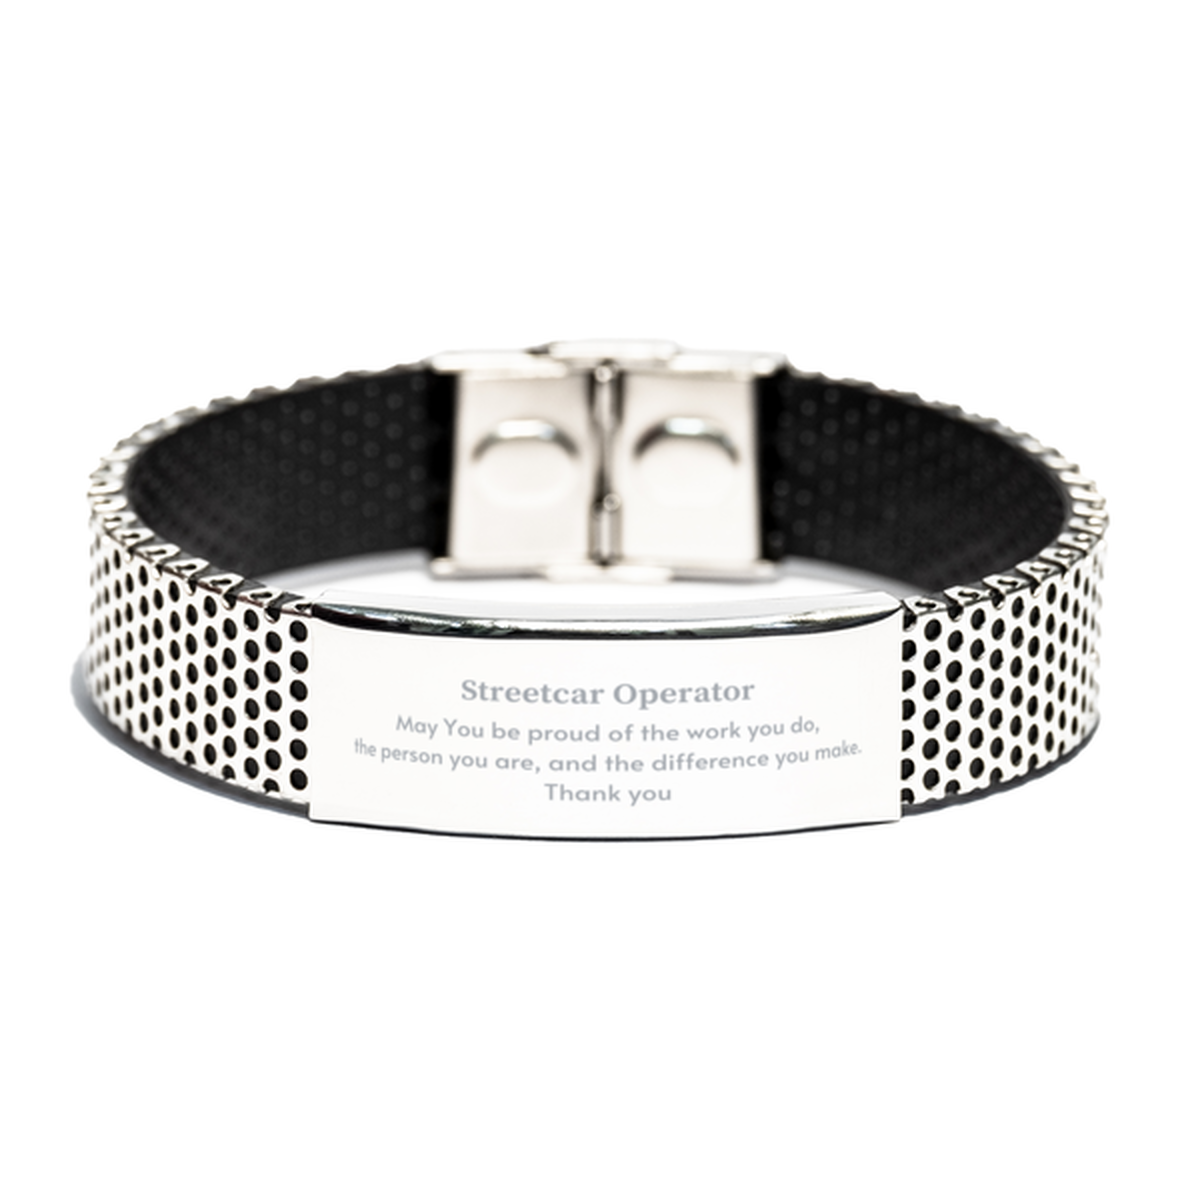 Heartwarming Stainless Steel Bracelet Retirement Coworkers Gifts for Streetcar Operator, Streetcar Operator May You be proud of the work you do, the person you are Gifts for Boss Men Women Friends